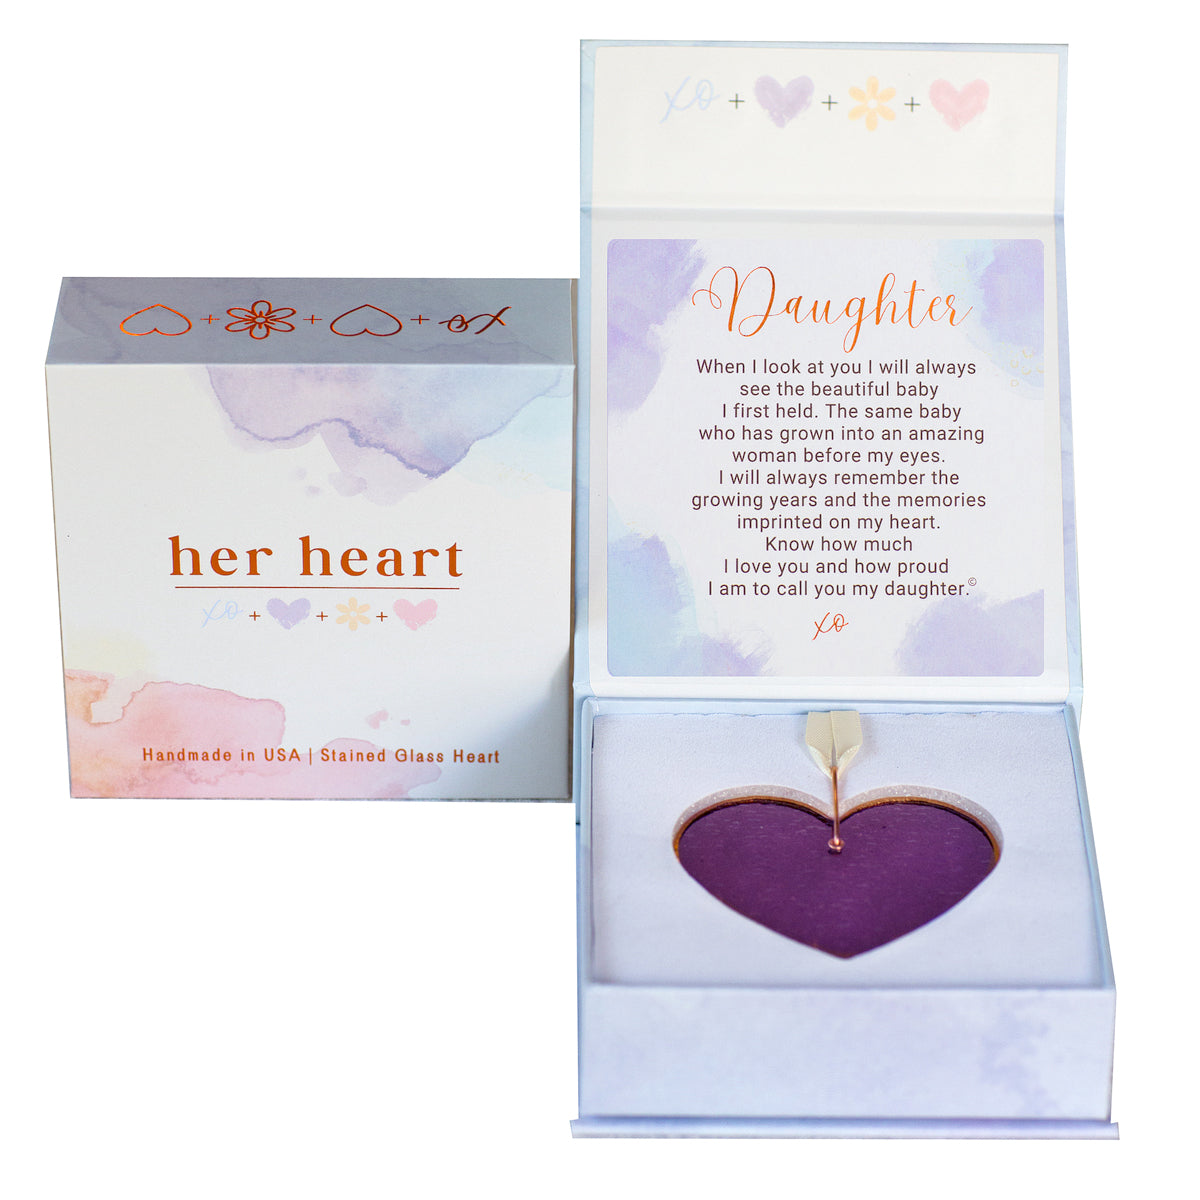 Her Heart for Daughter gift box shown closed and open.  Open box features sentiment card and heart resting in foam cushion.